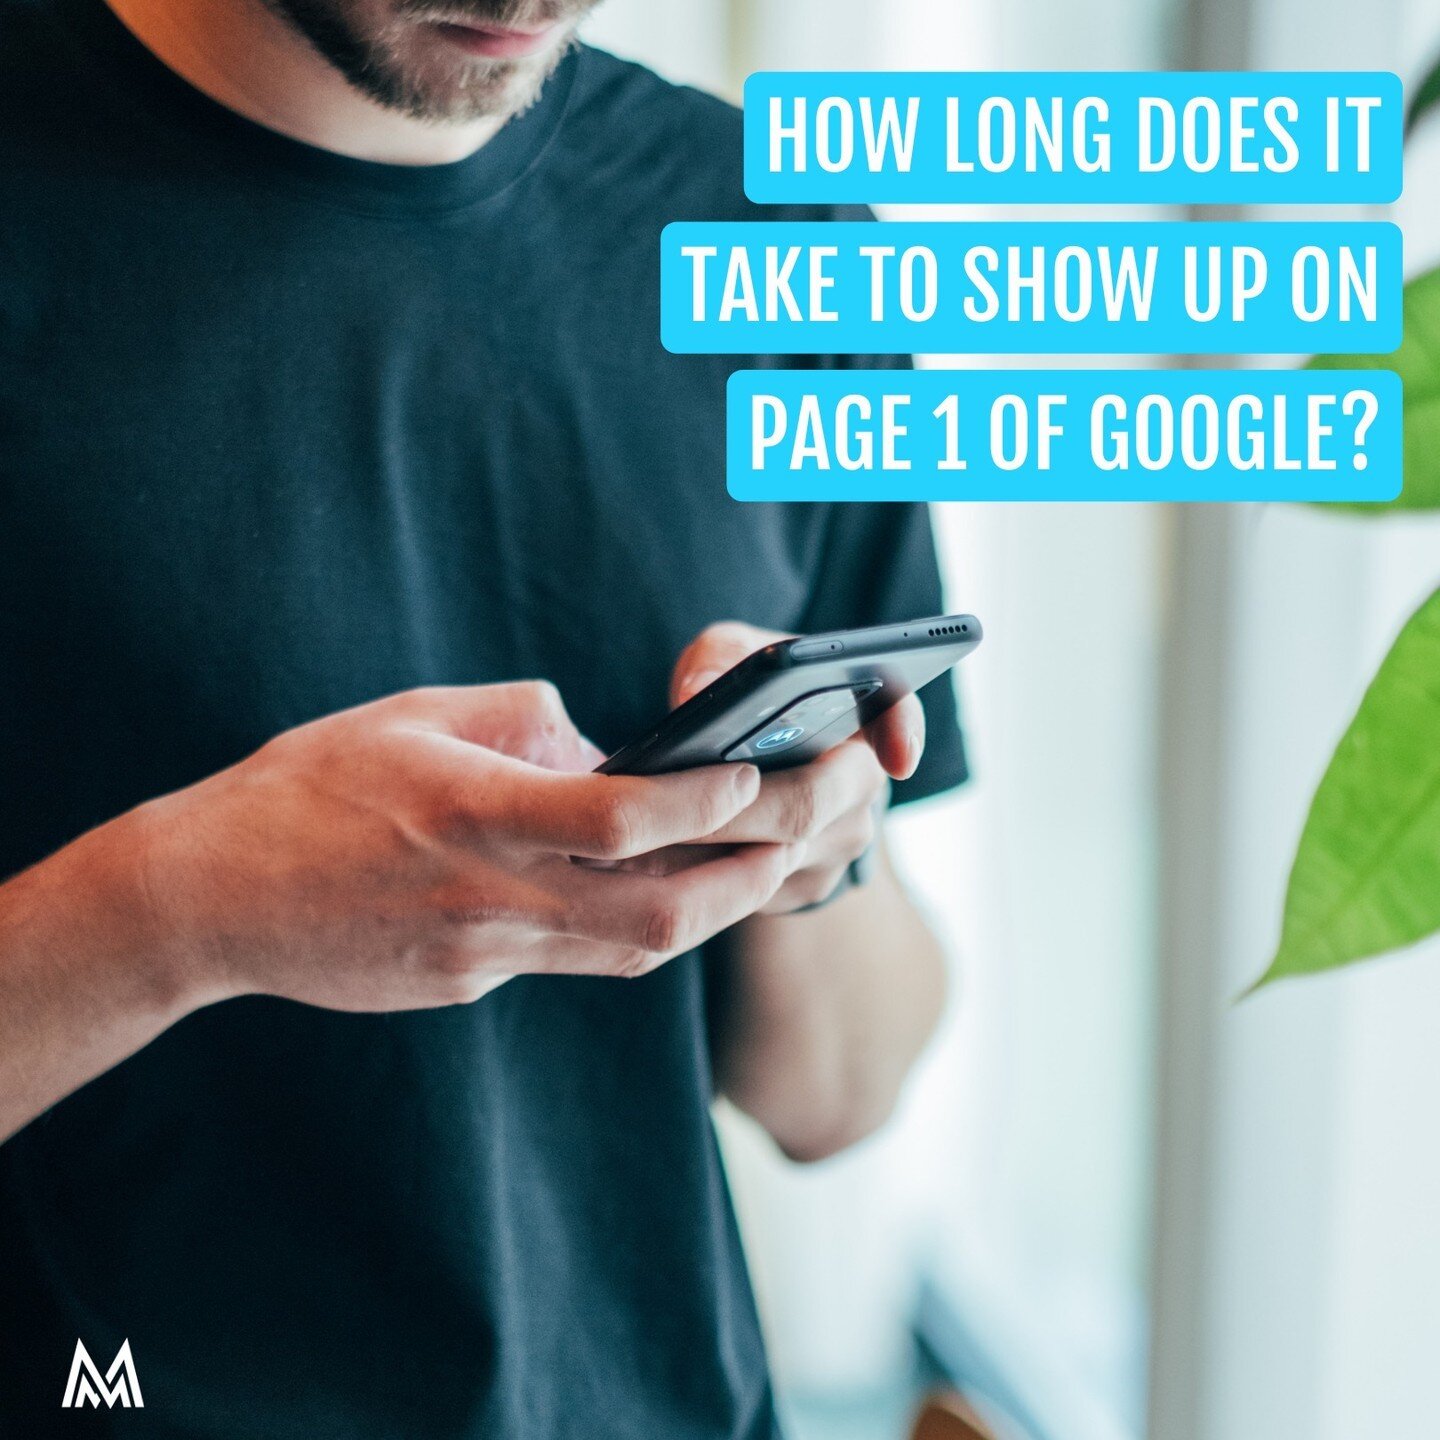 If you want to show up on the first page of Google when a customer is searching for something, you need to invest in SEO (Search Engine Optimisation).

SEO is incredibly powerful because if you do it right, you can have consistent traffic and leads c